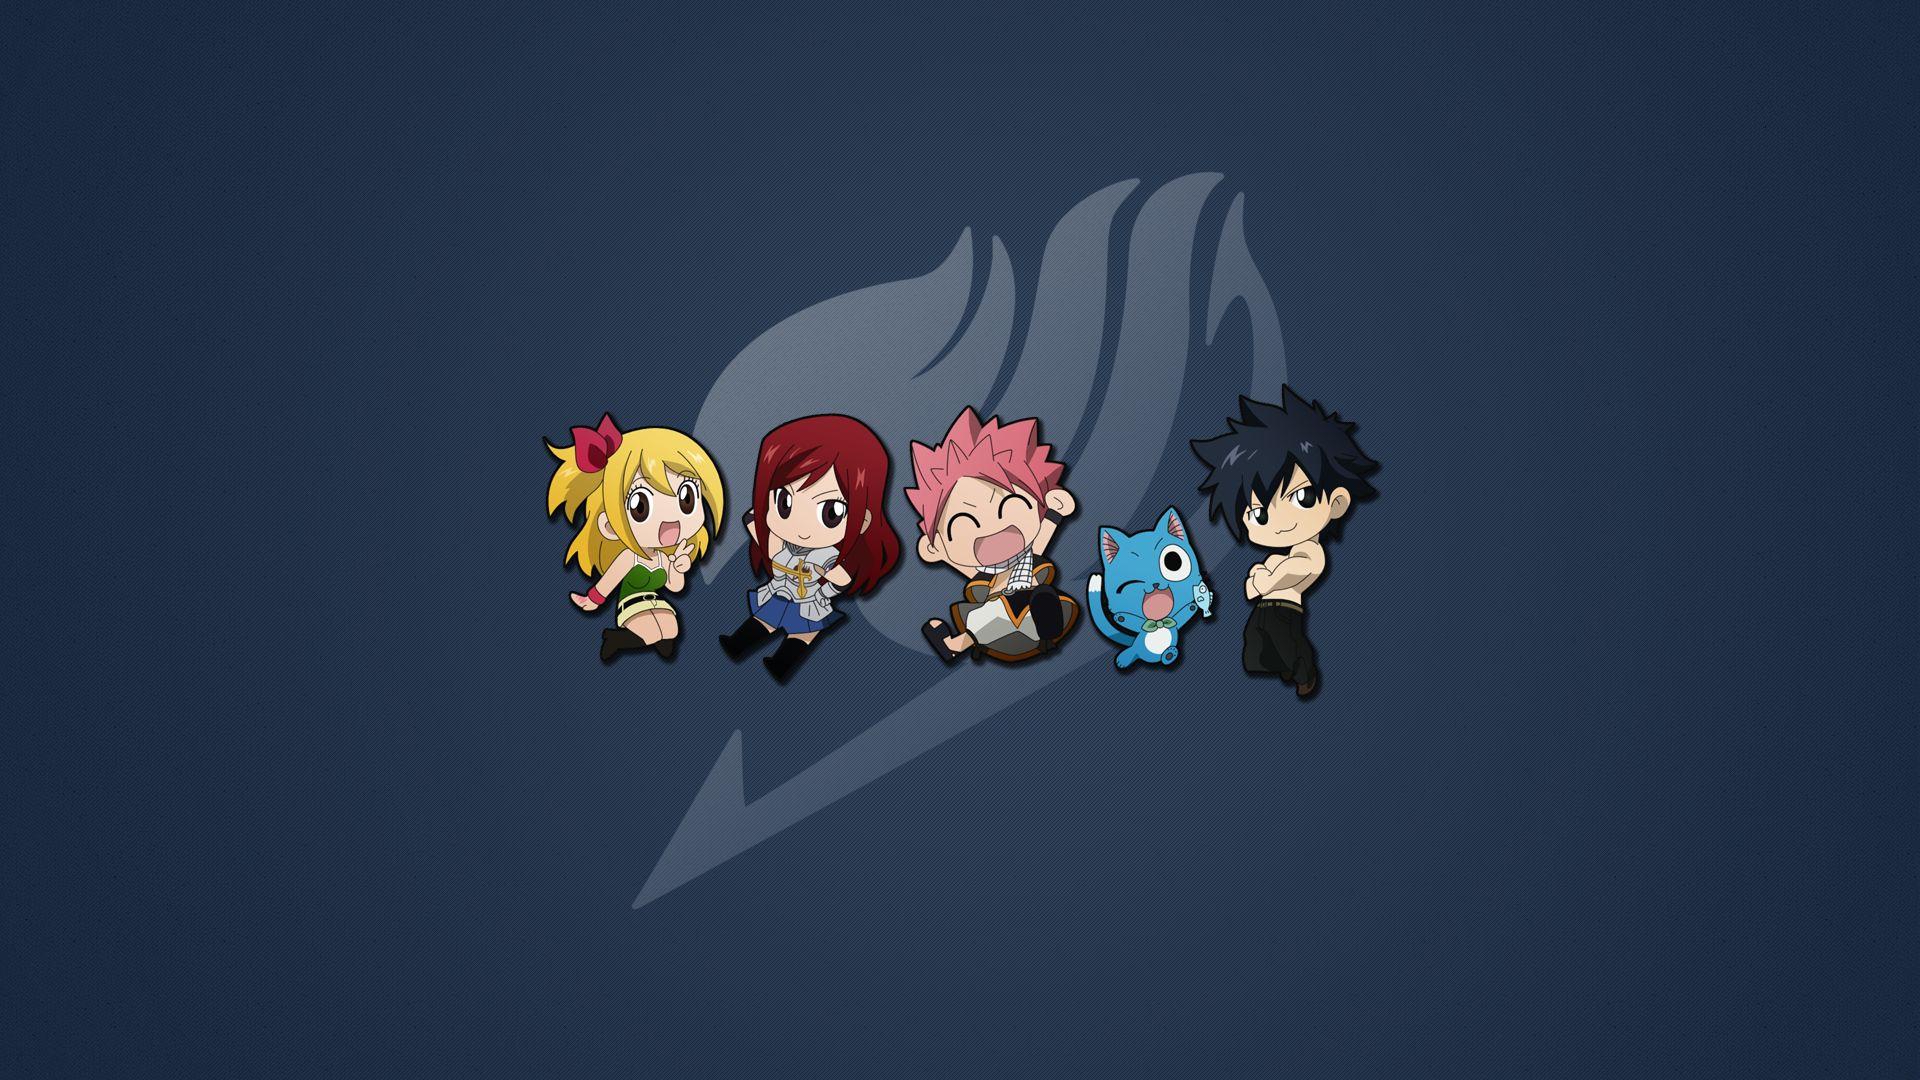 Fairy Tail HD Wallpaper. Background. Fairy